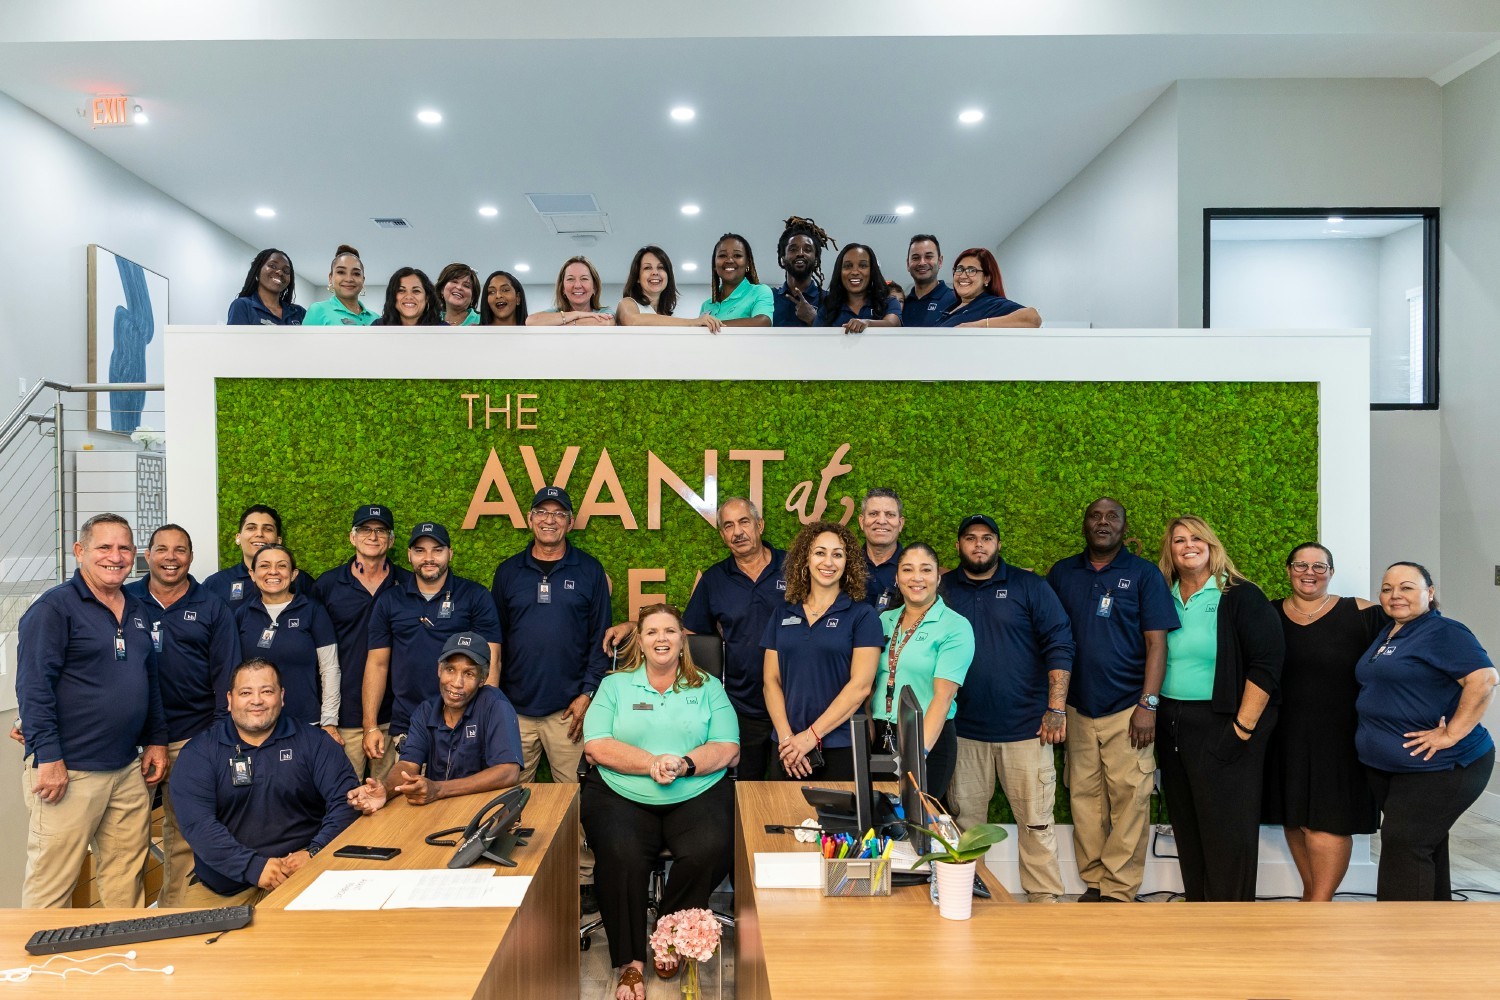 The team at the Avant at Pembroke Pines in FL celebrates the completion of a $30M renovation project.